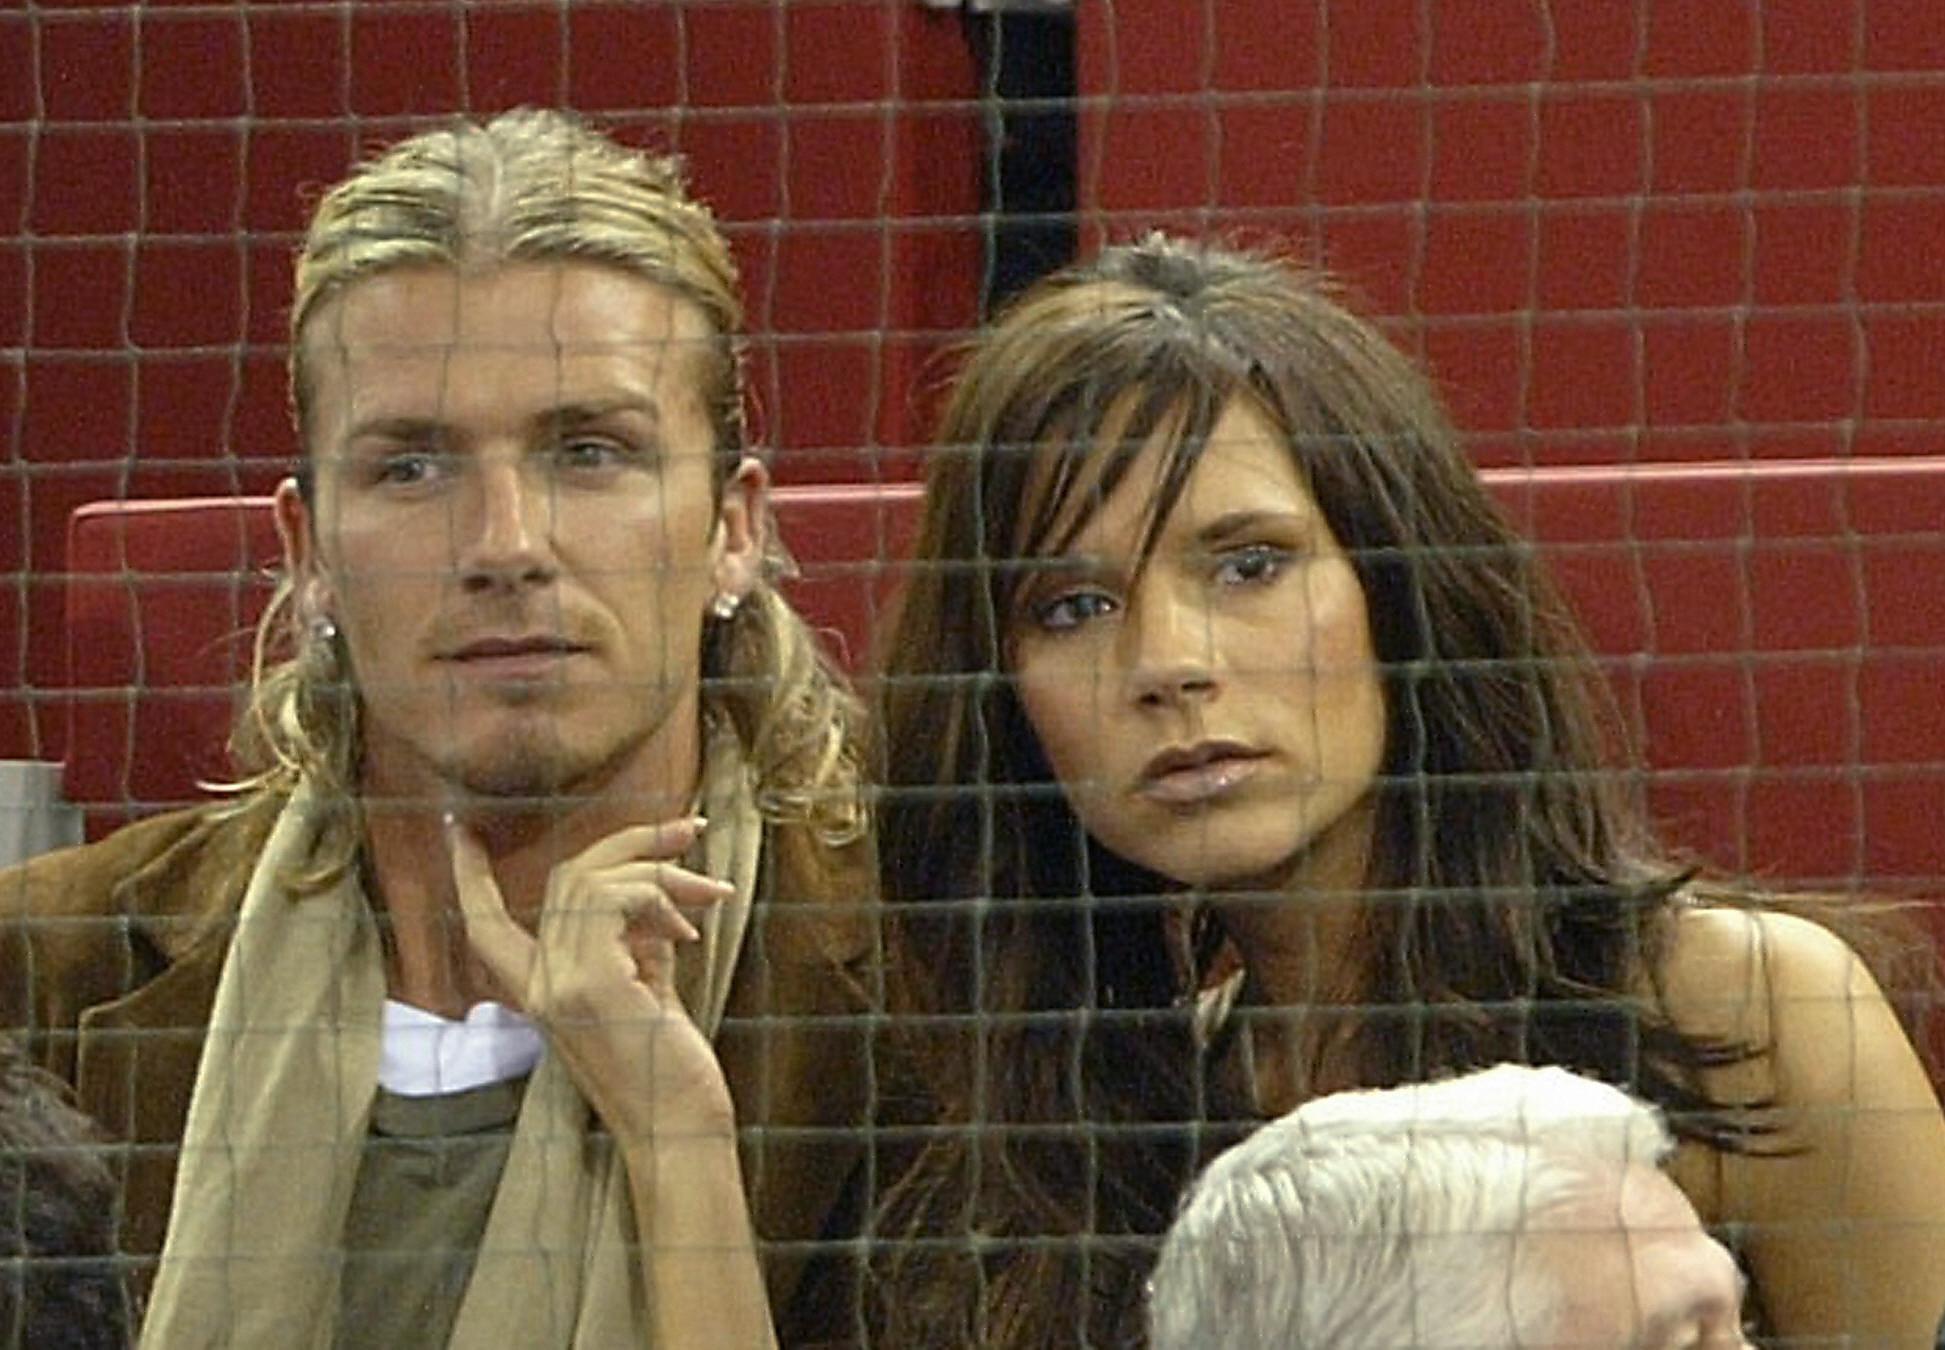 David Beckham and Victoria Beckham watch the Masters Series match between Spaniard Juan Carlos Ferrero and South African Wayne Ferreira in Madrid on October 15, 2003 | Source: Getty Images